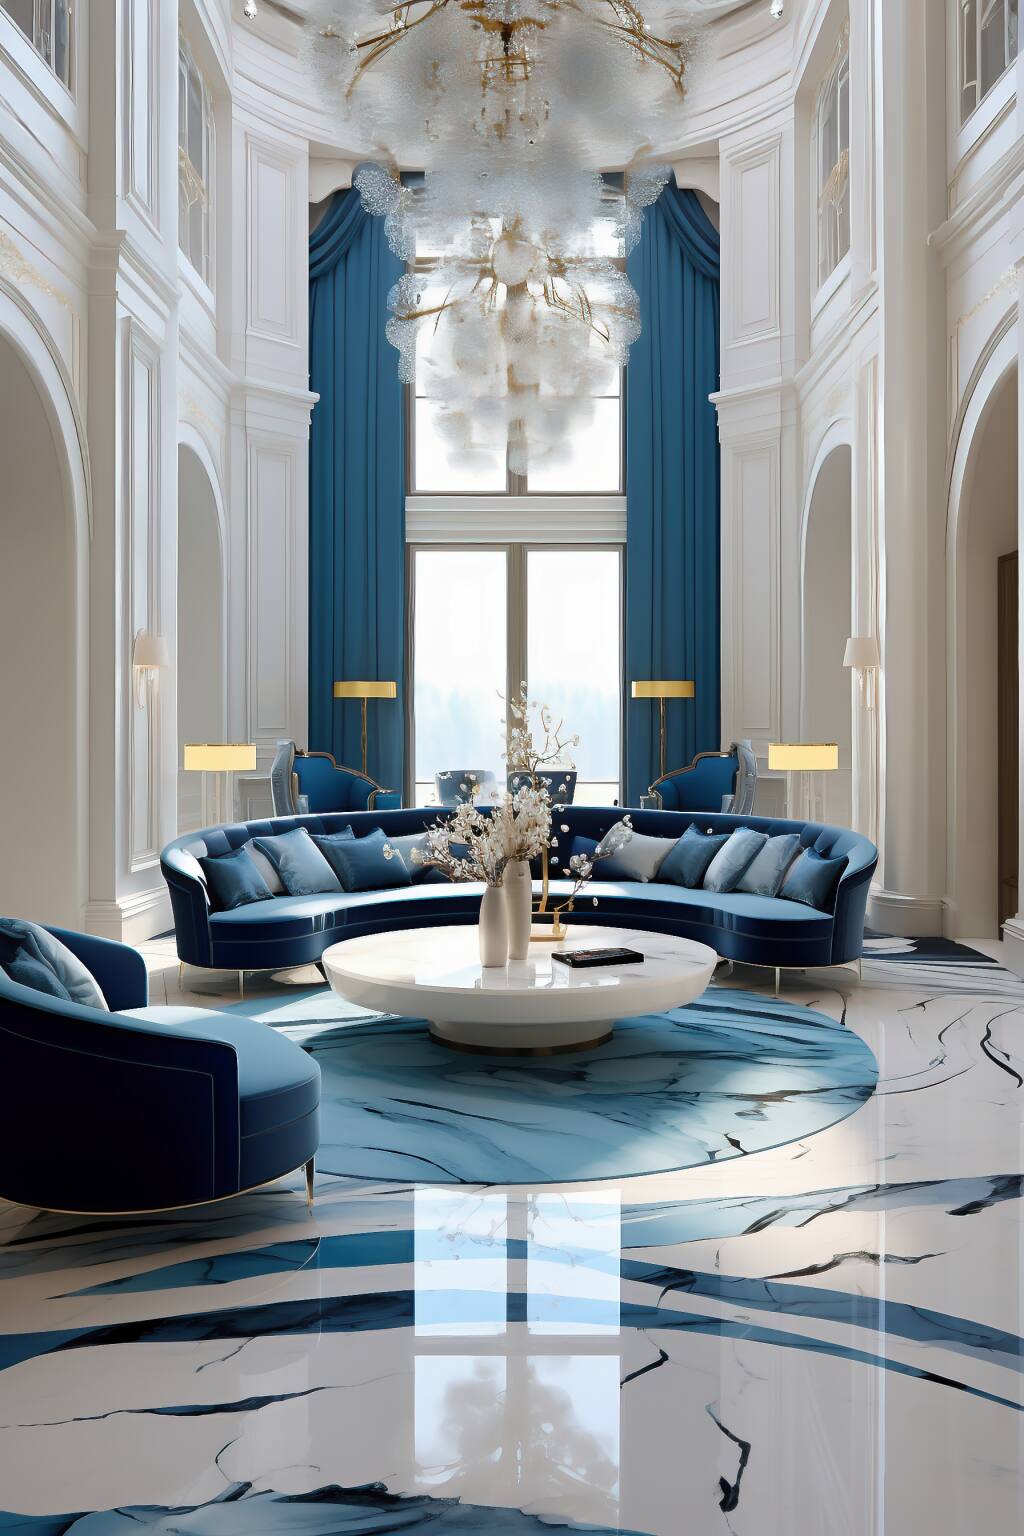 Luxurious Coastal Living Room With Navy Blue Velvet Sofas, White Circular Coffee Table, Gold-Framed Side Tables, And A Striking Marble Floor, Bathed In Natural Light For A Serene, Chic Atmosphere.